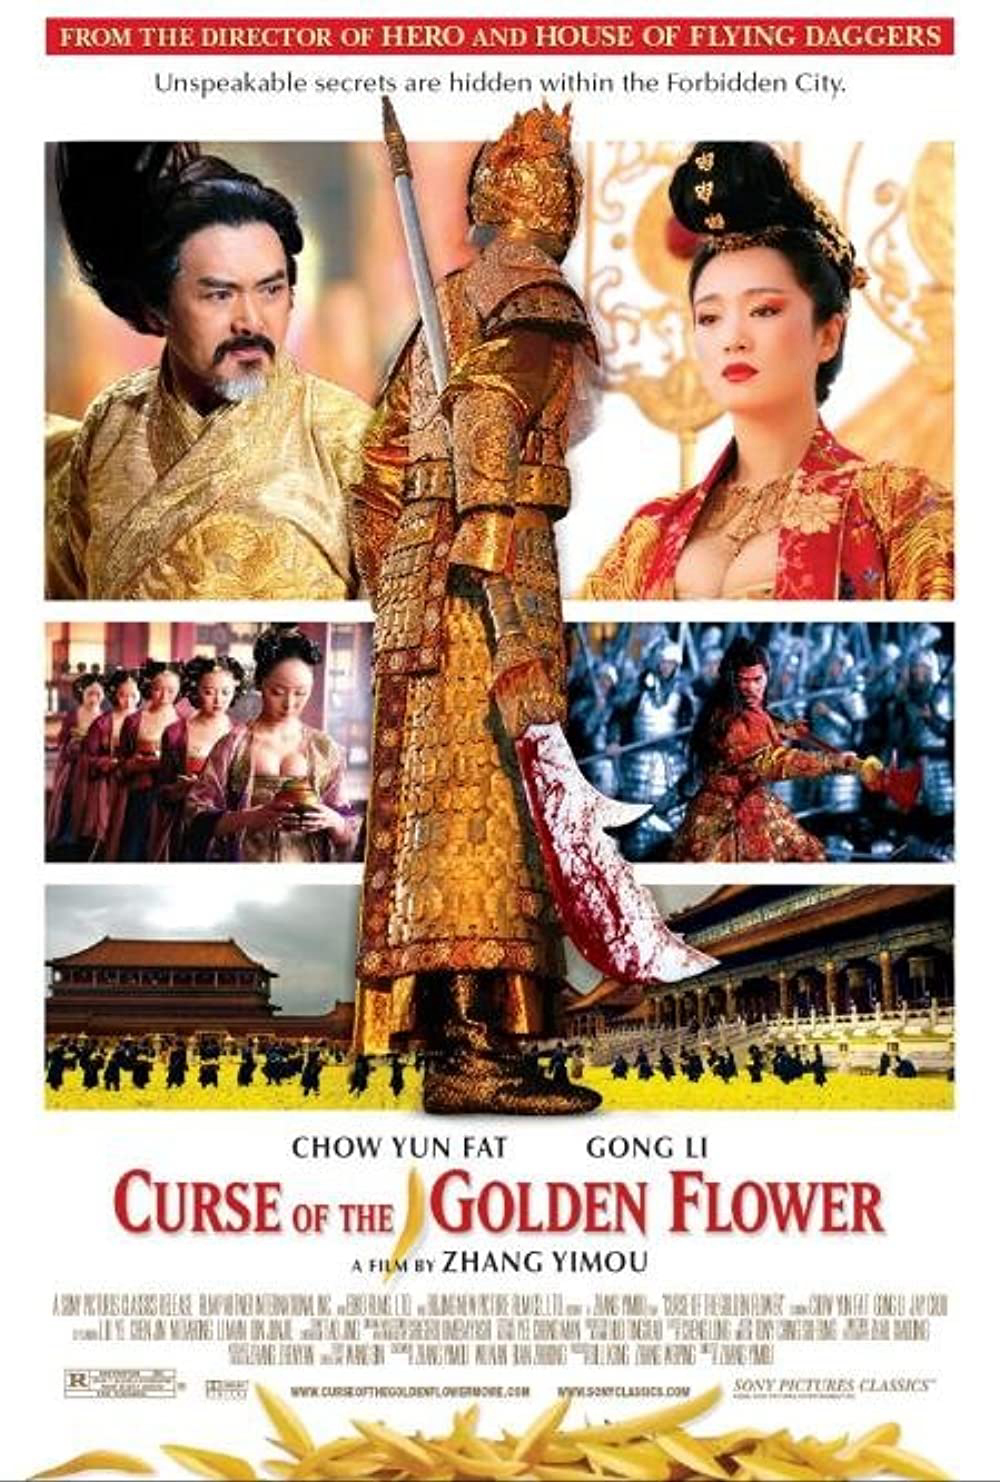 Poster Phim Hoàng Kim Giáp (Curse of the Golden Flower)